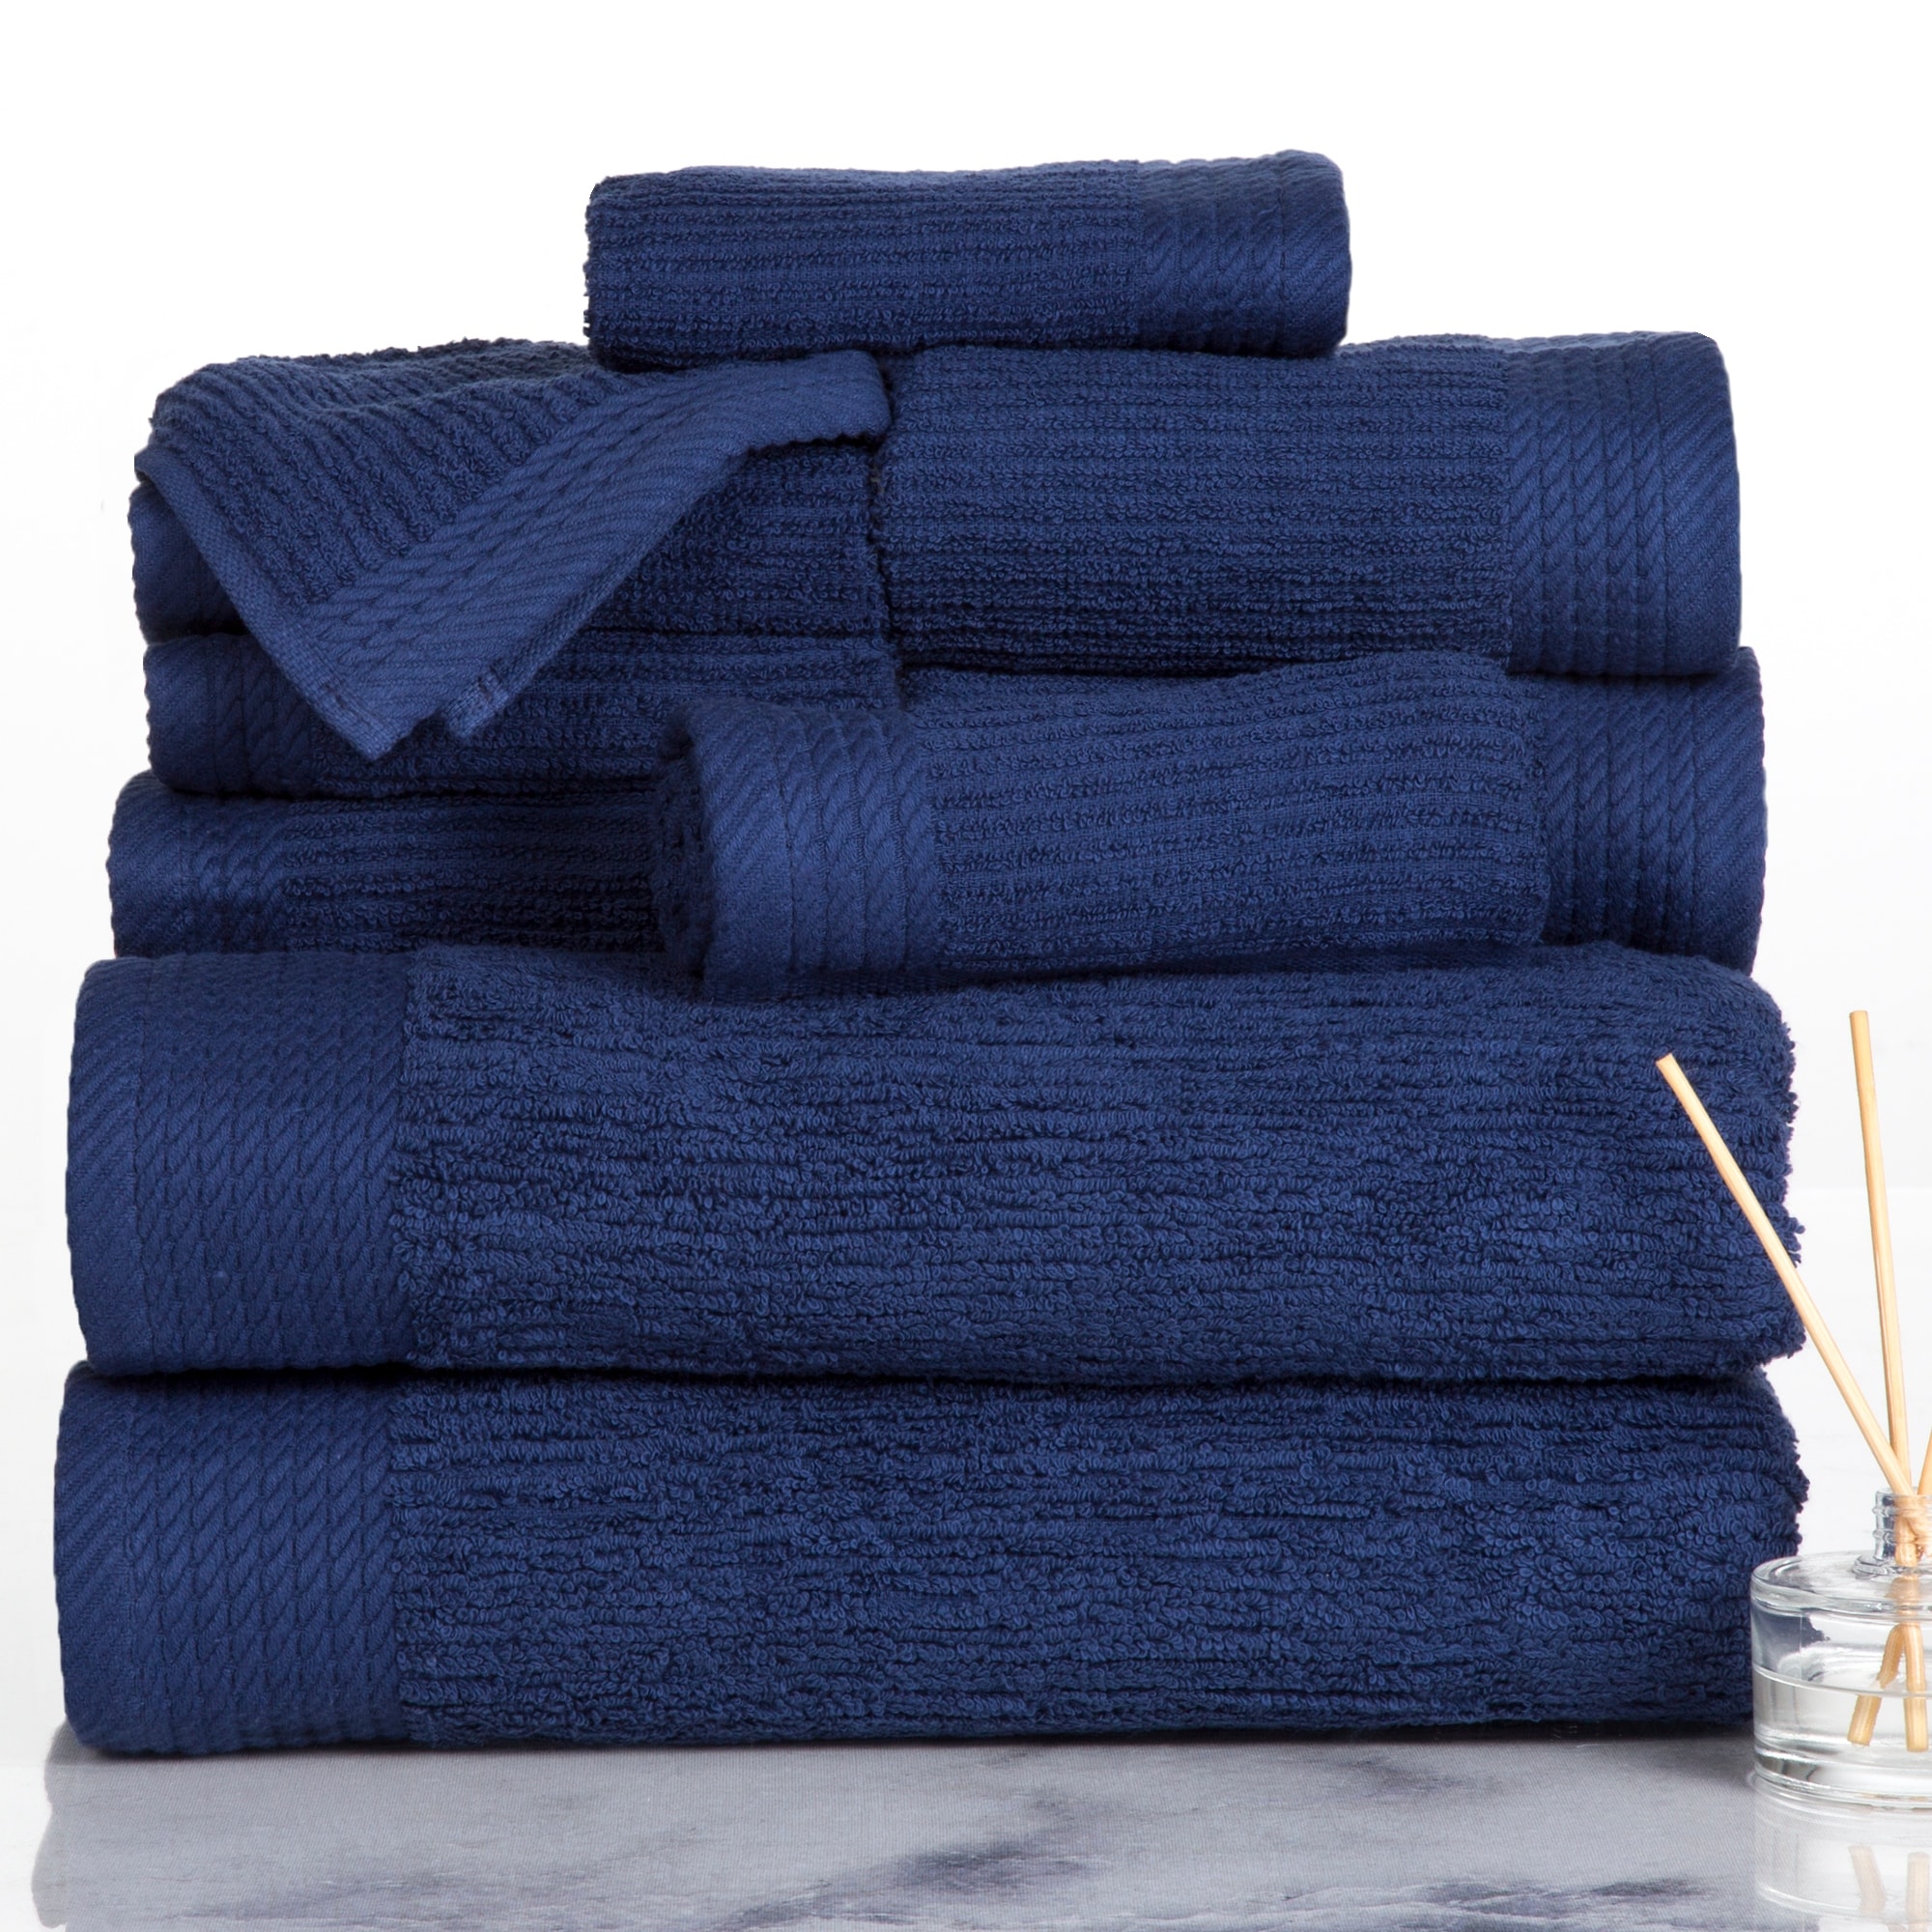 American Soft Linen 100% Cotton Hair Drying Towels for Women, 2 Pack Head Towel Cap, Navy-Blue